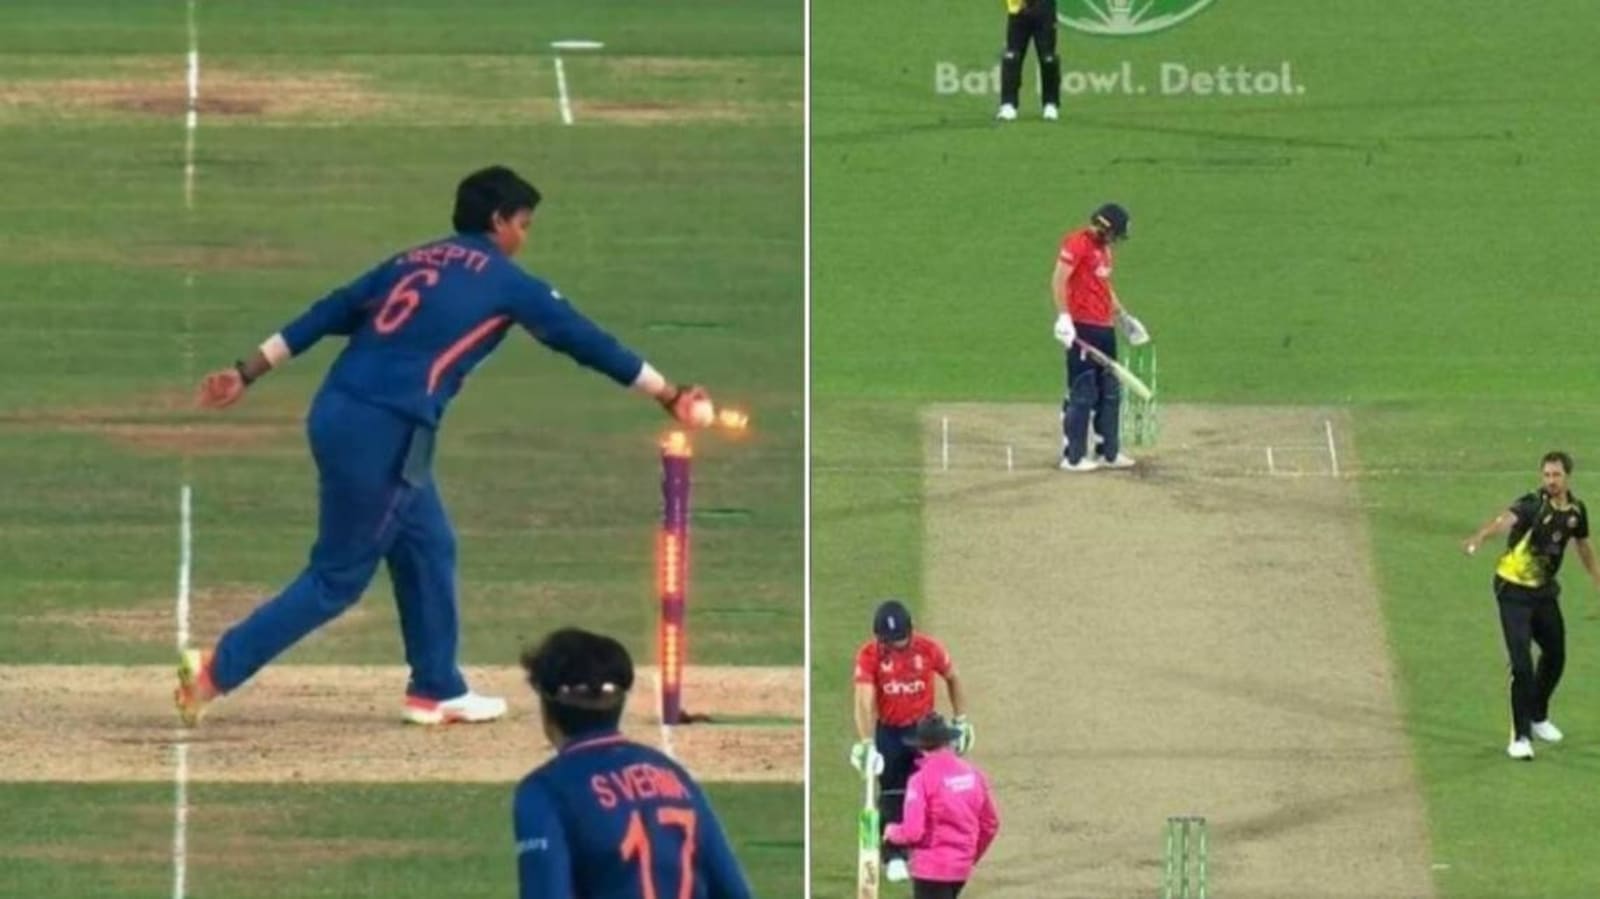 i-m-not-deepti-but-mitchell-starc-s-words-to-jos-buttler-starts-fiery-exchange-sparks-non-striker-run-out-debate